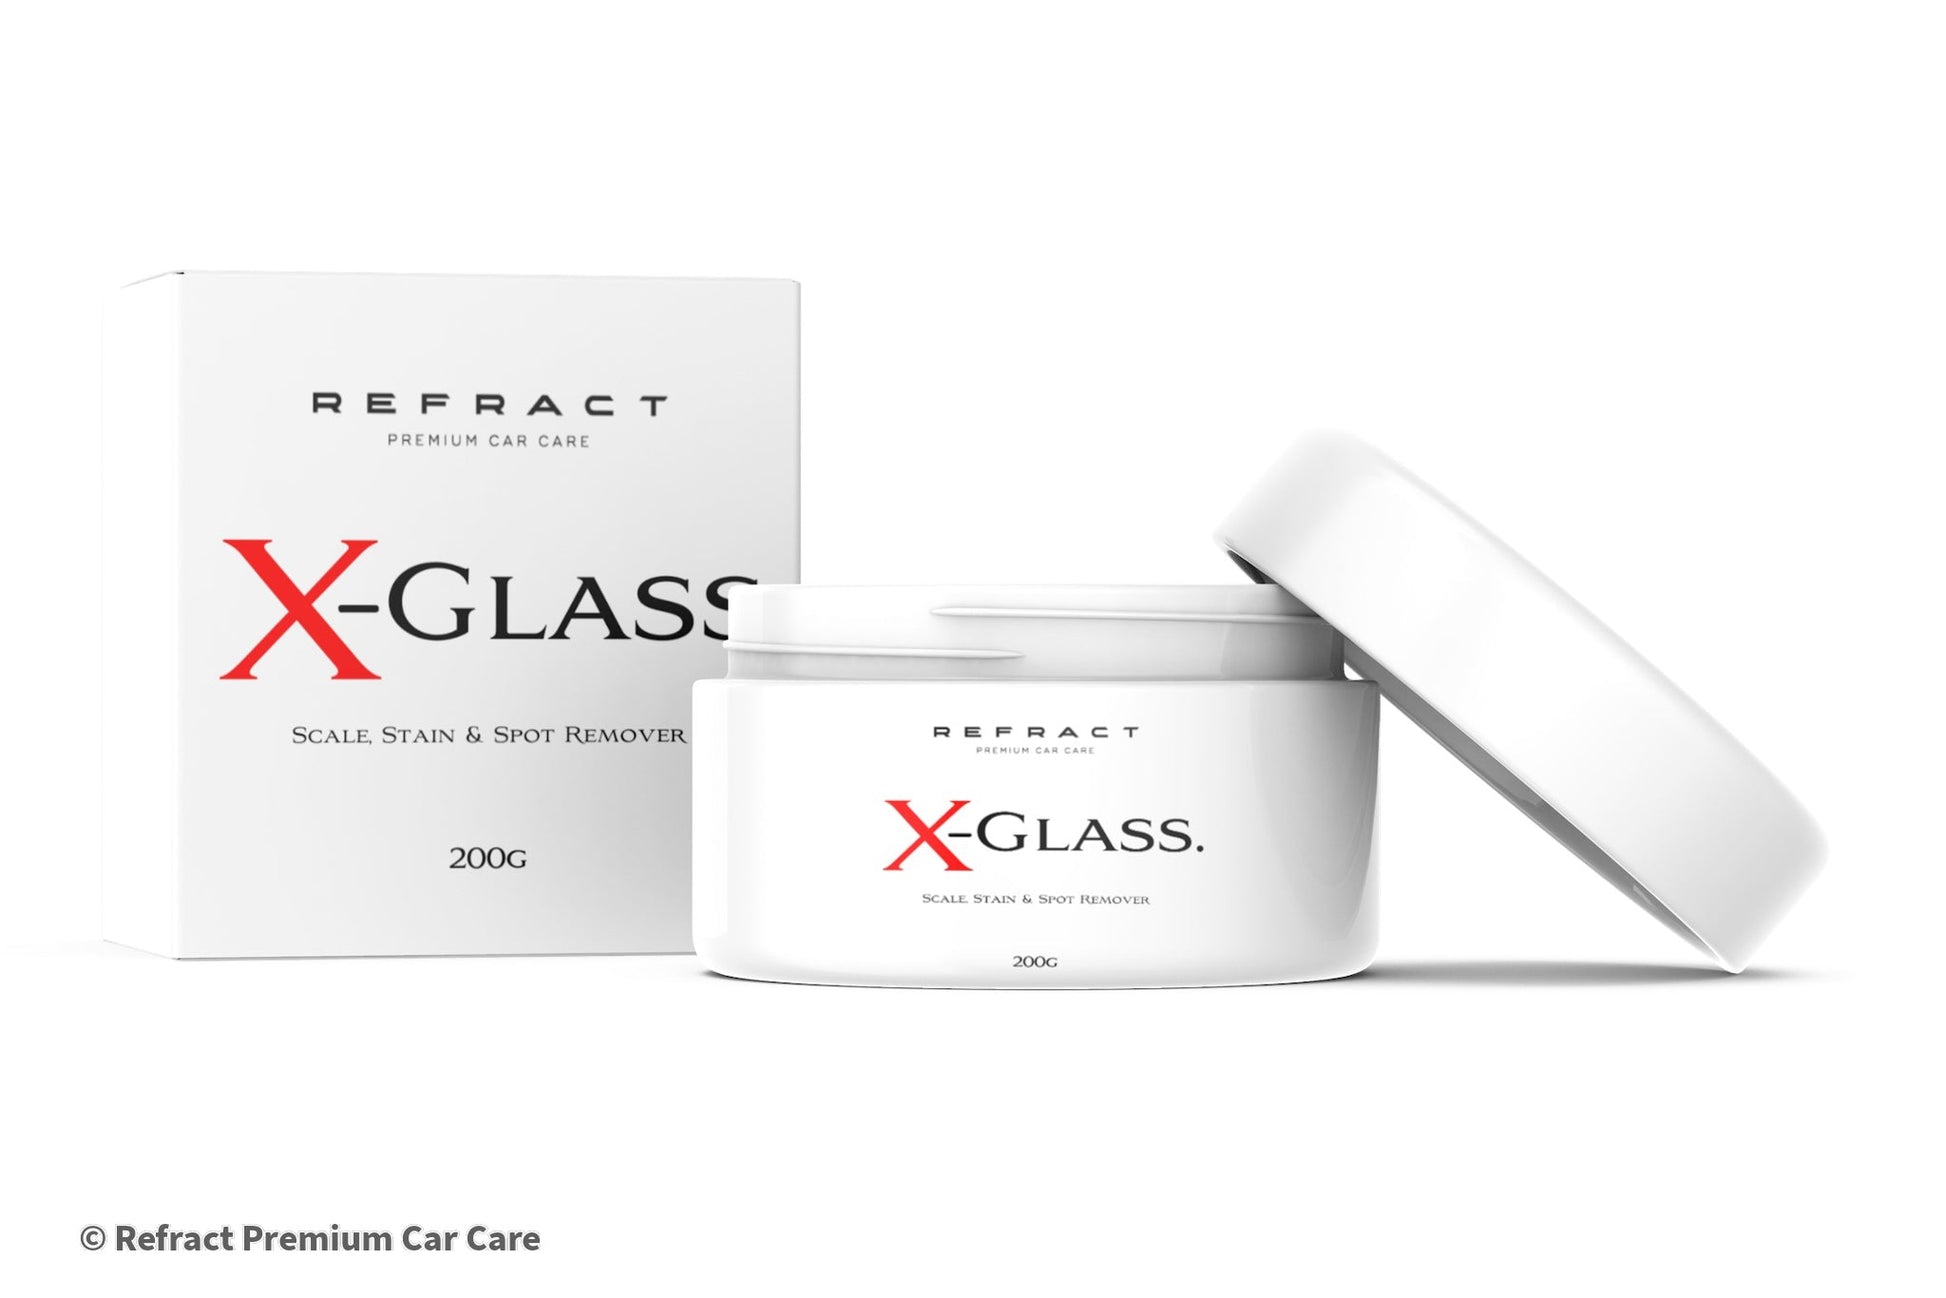 Refract Premium Car Care Products Refract X-Glass - Bore Water Stain & Heavy Scale Spot Remover Kit $129.95